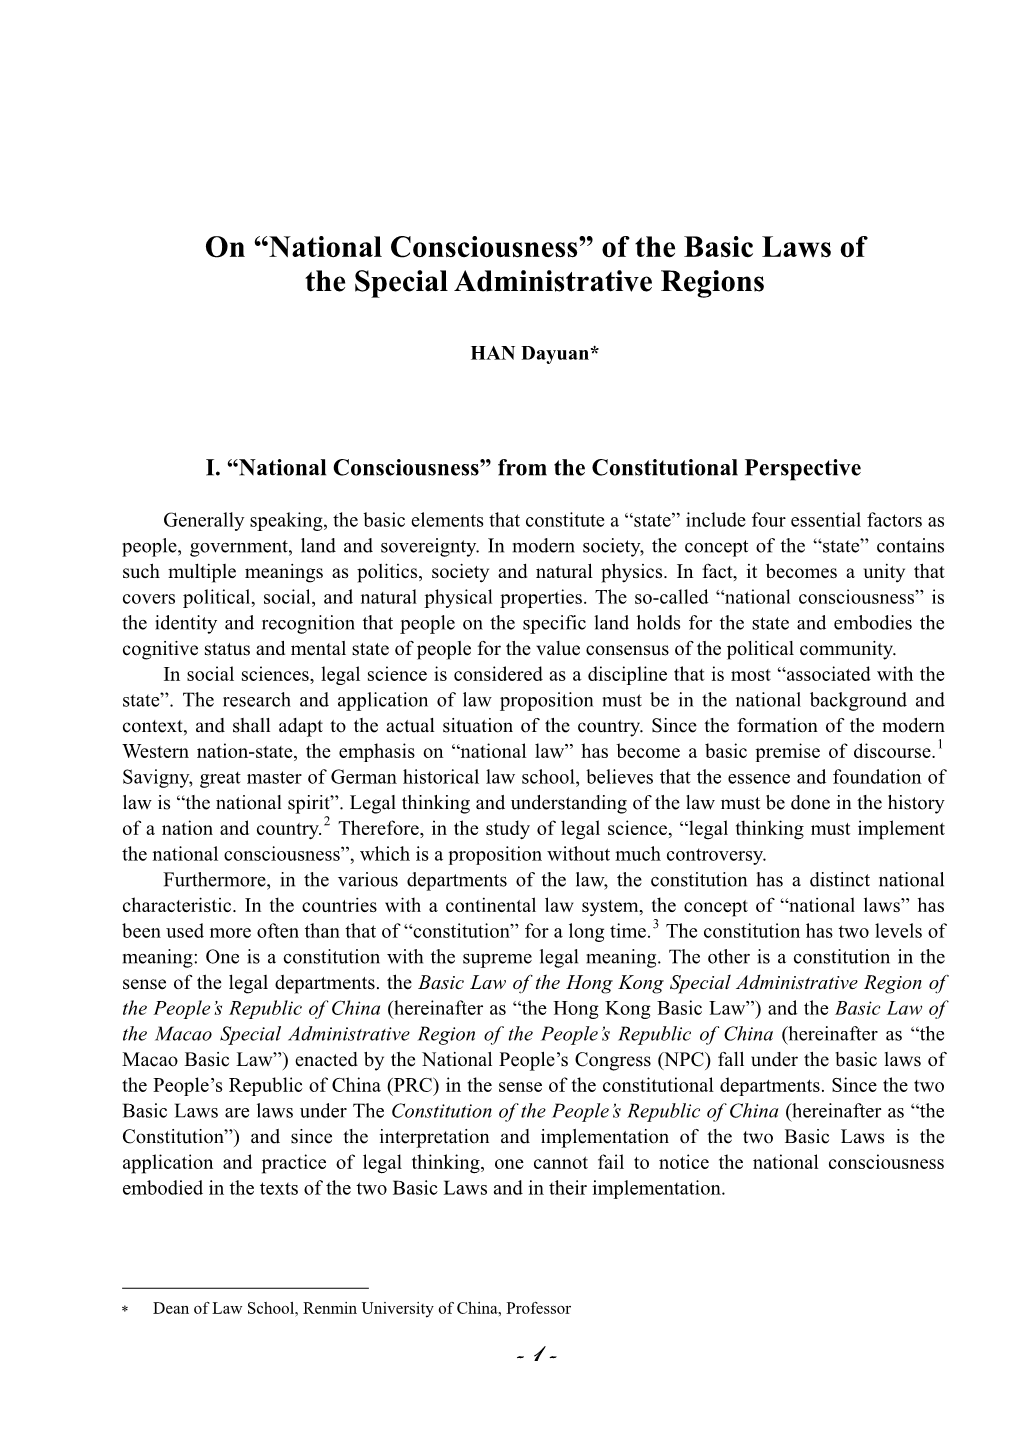 On “National Consciousness” of the Basic Laws of the Special Administrative Regions